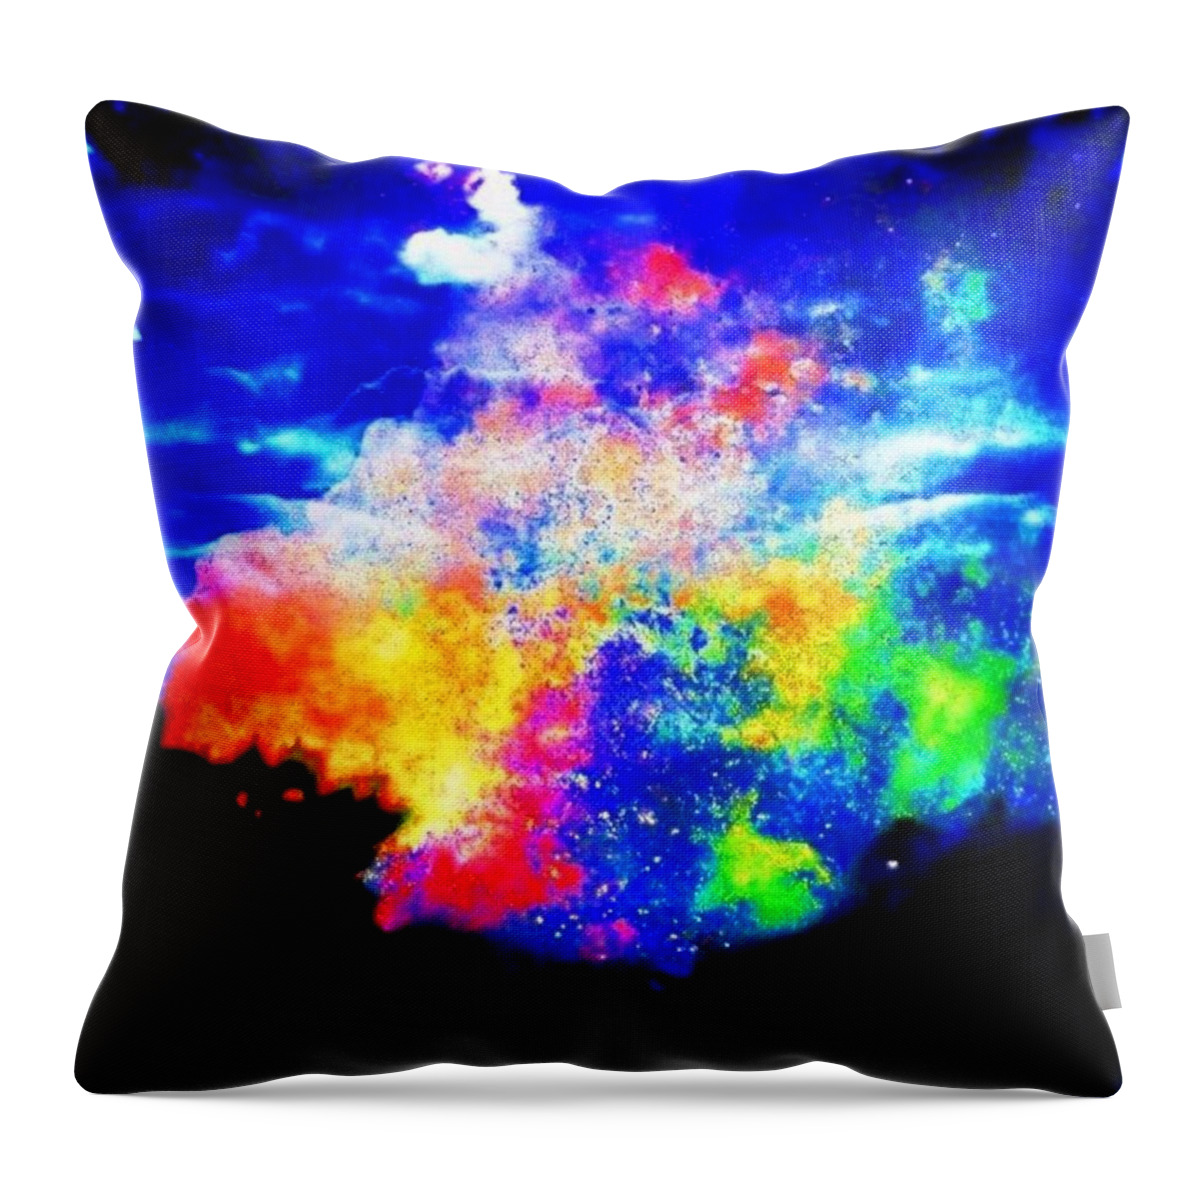 Treeobsession Throw Pillow featuring the photograph Somewhere Over The Rainbow by Nick Heap